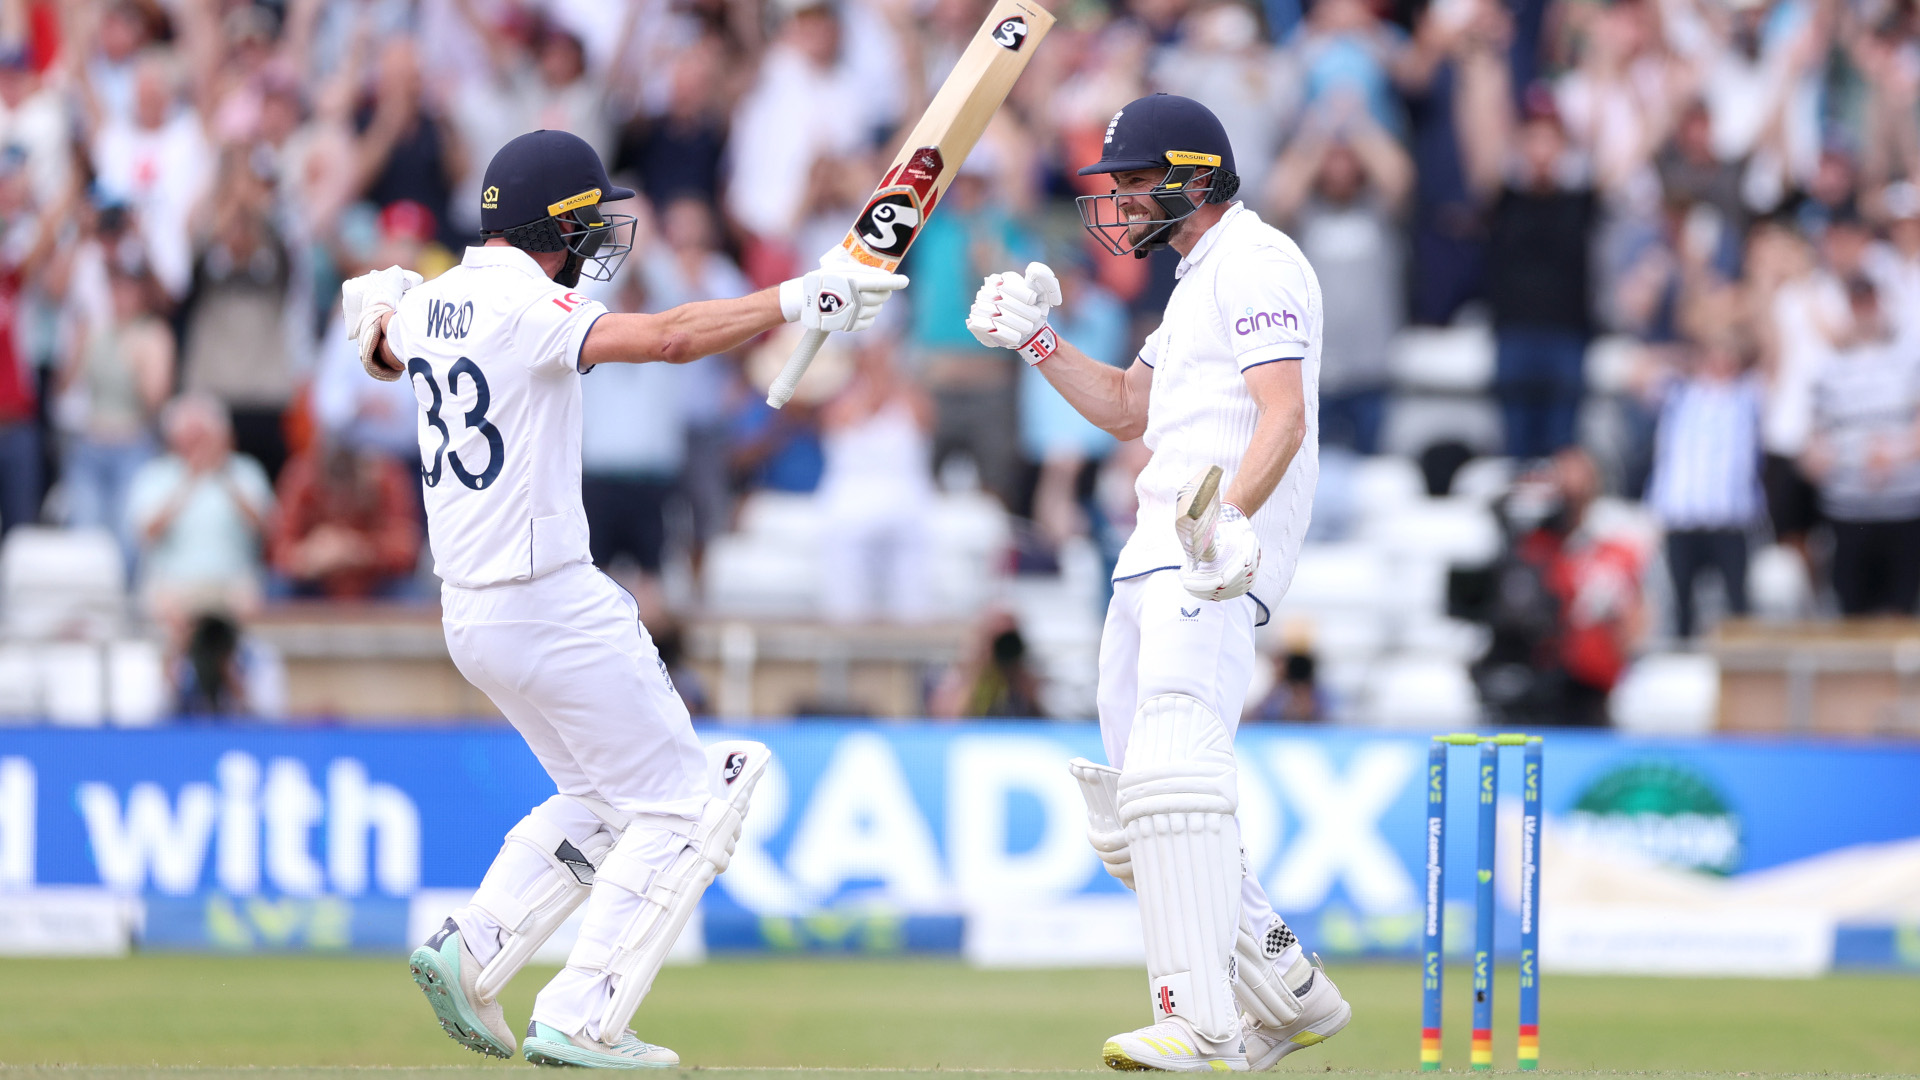 England vs Australia live stream — how to watch the Ashes 4th Test, Day 5 TechRadar